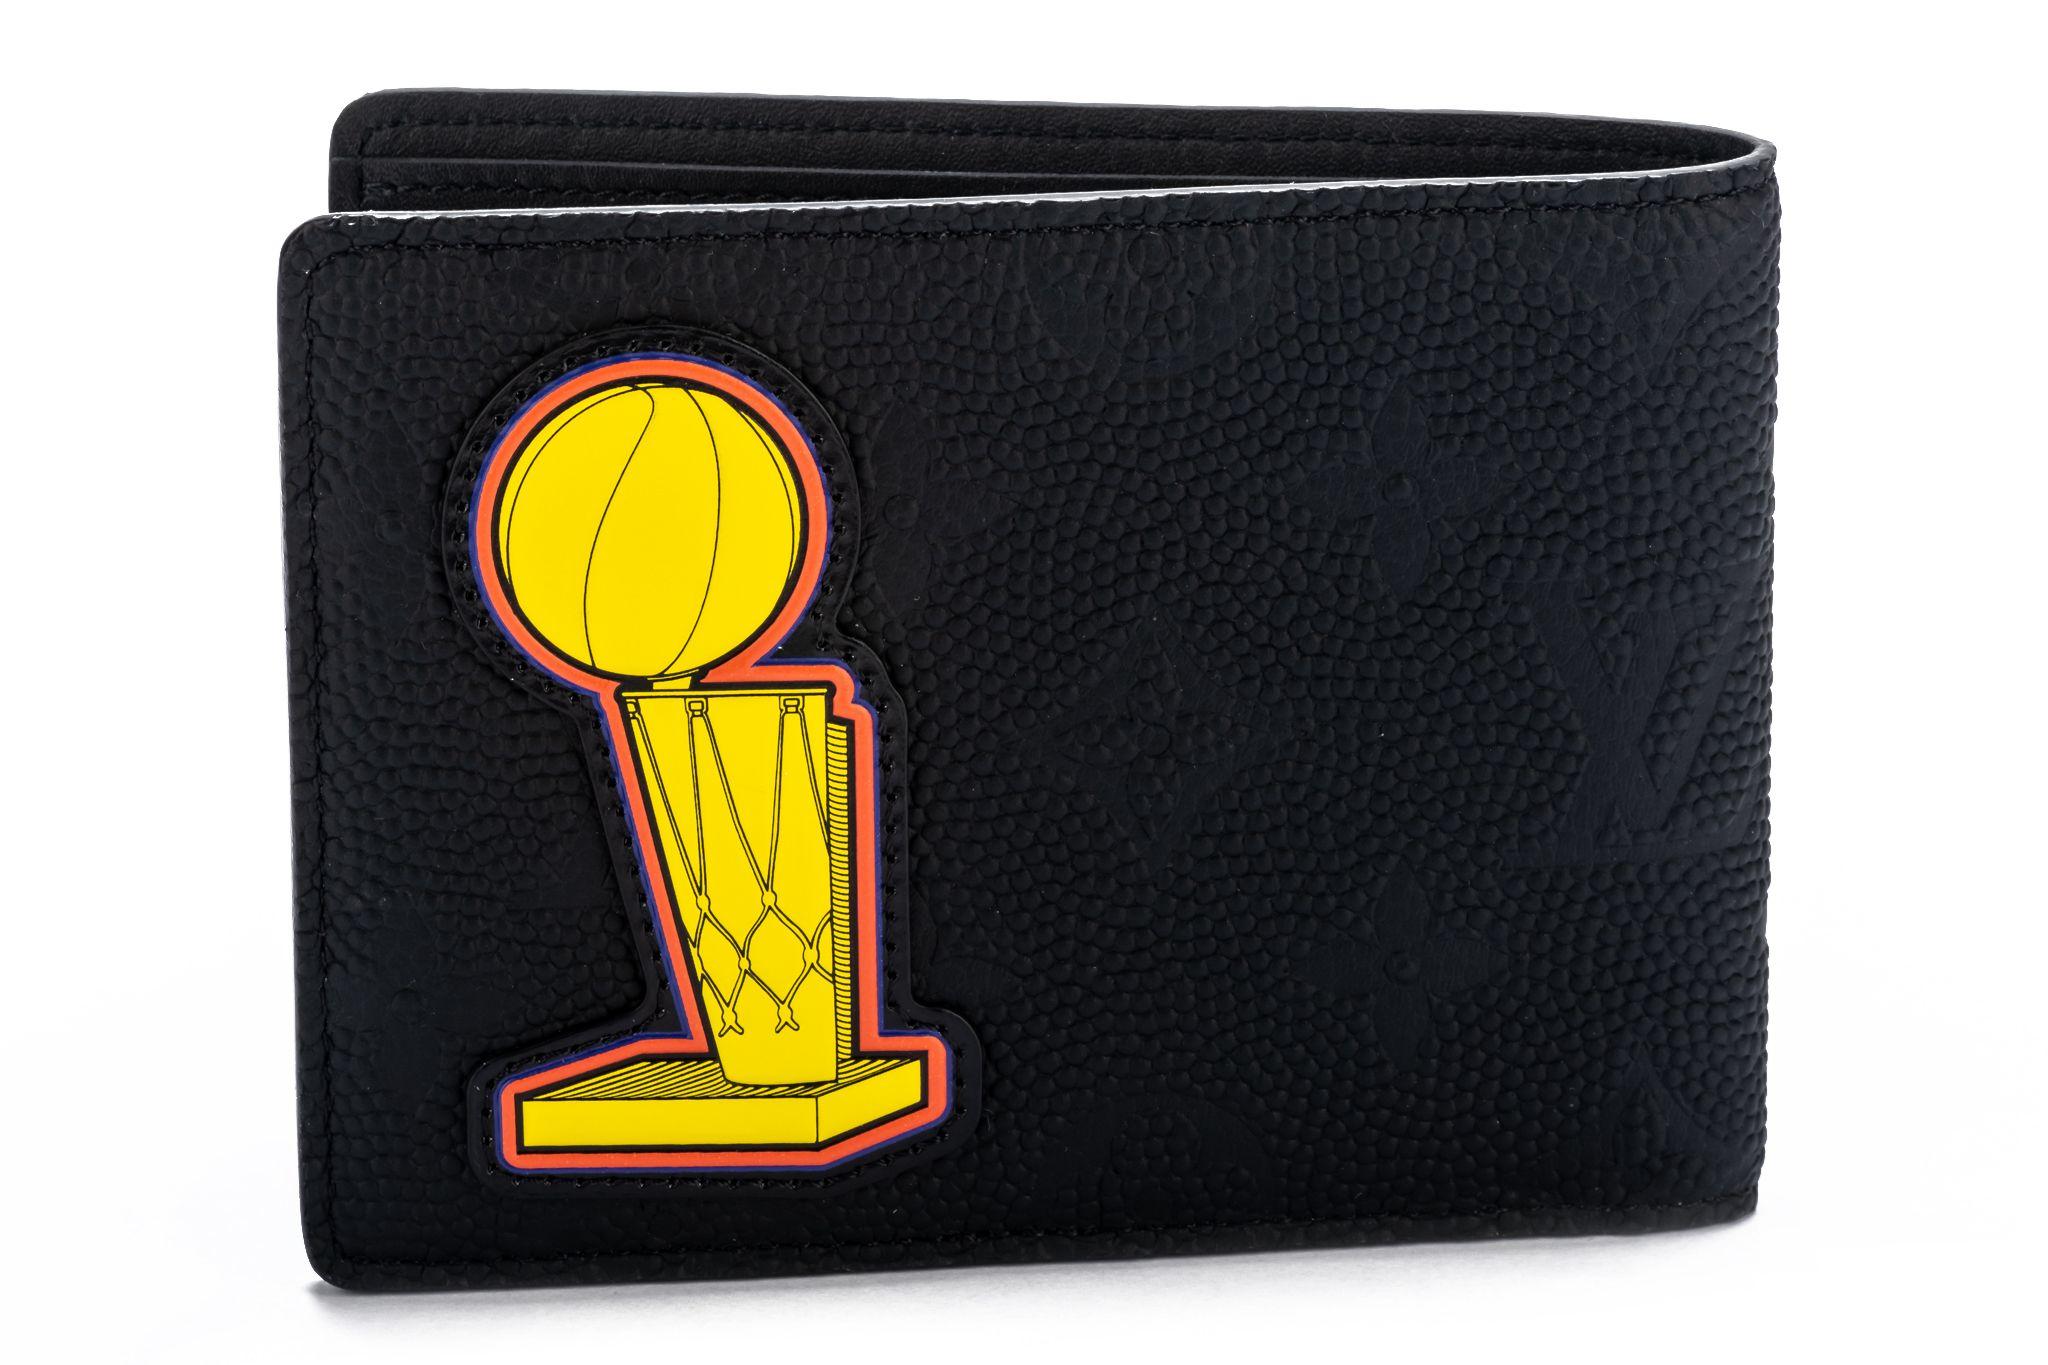 Featuring patches evoking the world of the NBA and basketball championships, this sporty Multiple Wallet is fashioned from Monogram-embossed leather. Its simple but exquisitely crafted interior has several slots for cards, banknotes and receipts.